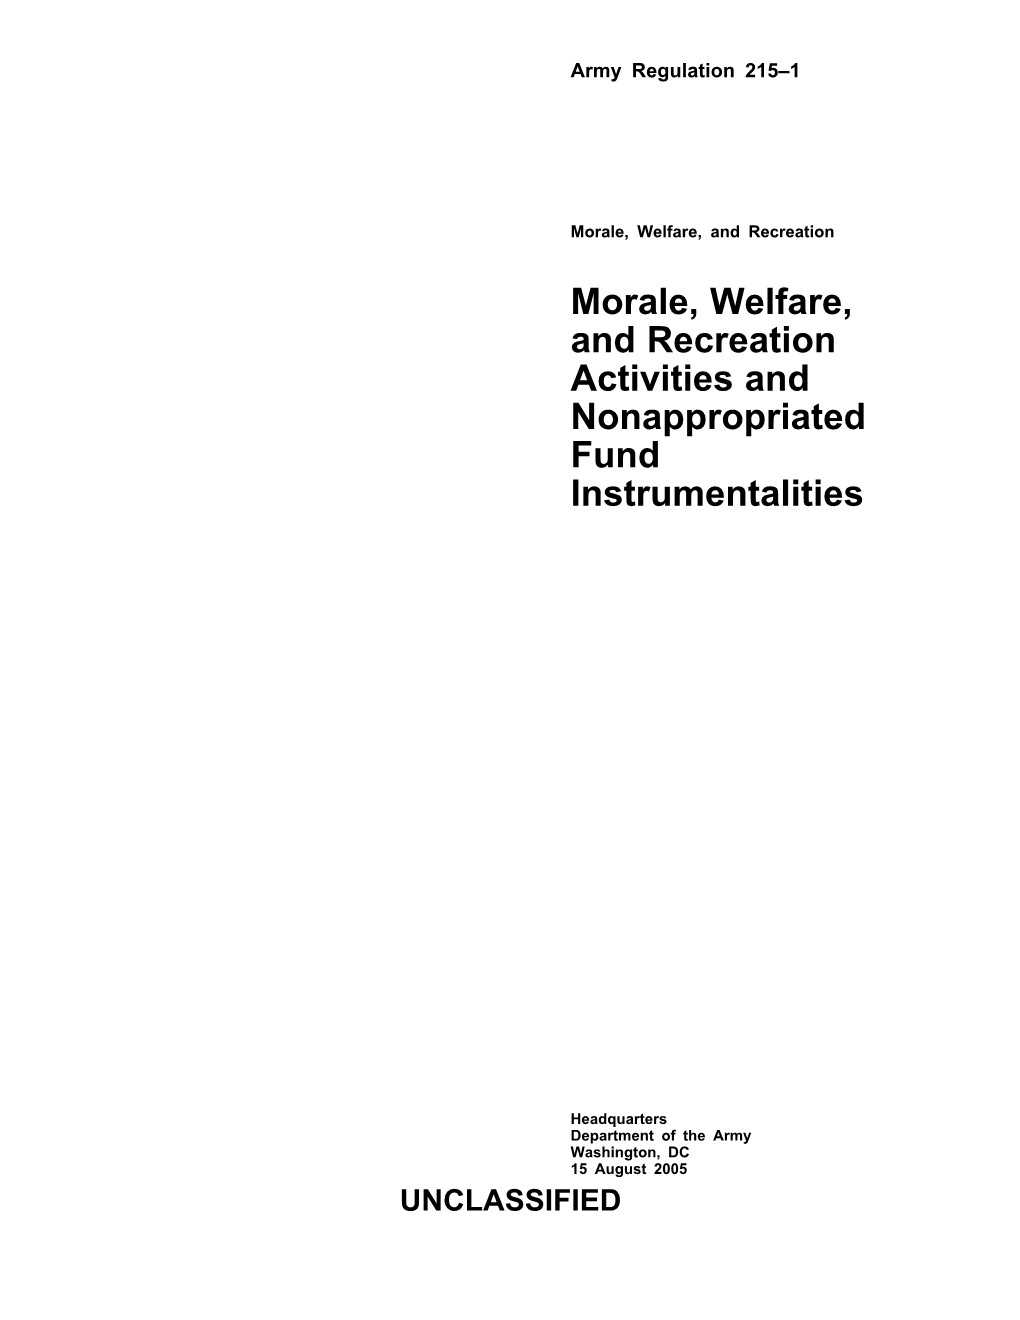 Morale, Welfare, and Recreation Activities and Nonappropriated Fund Instrumentalities